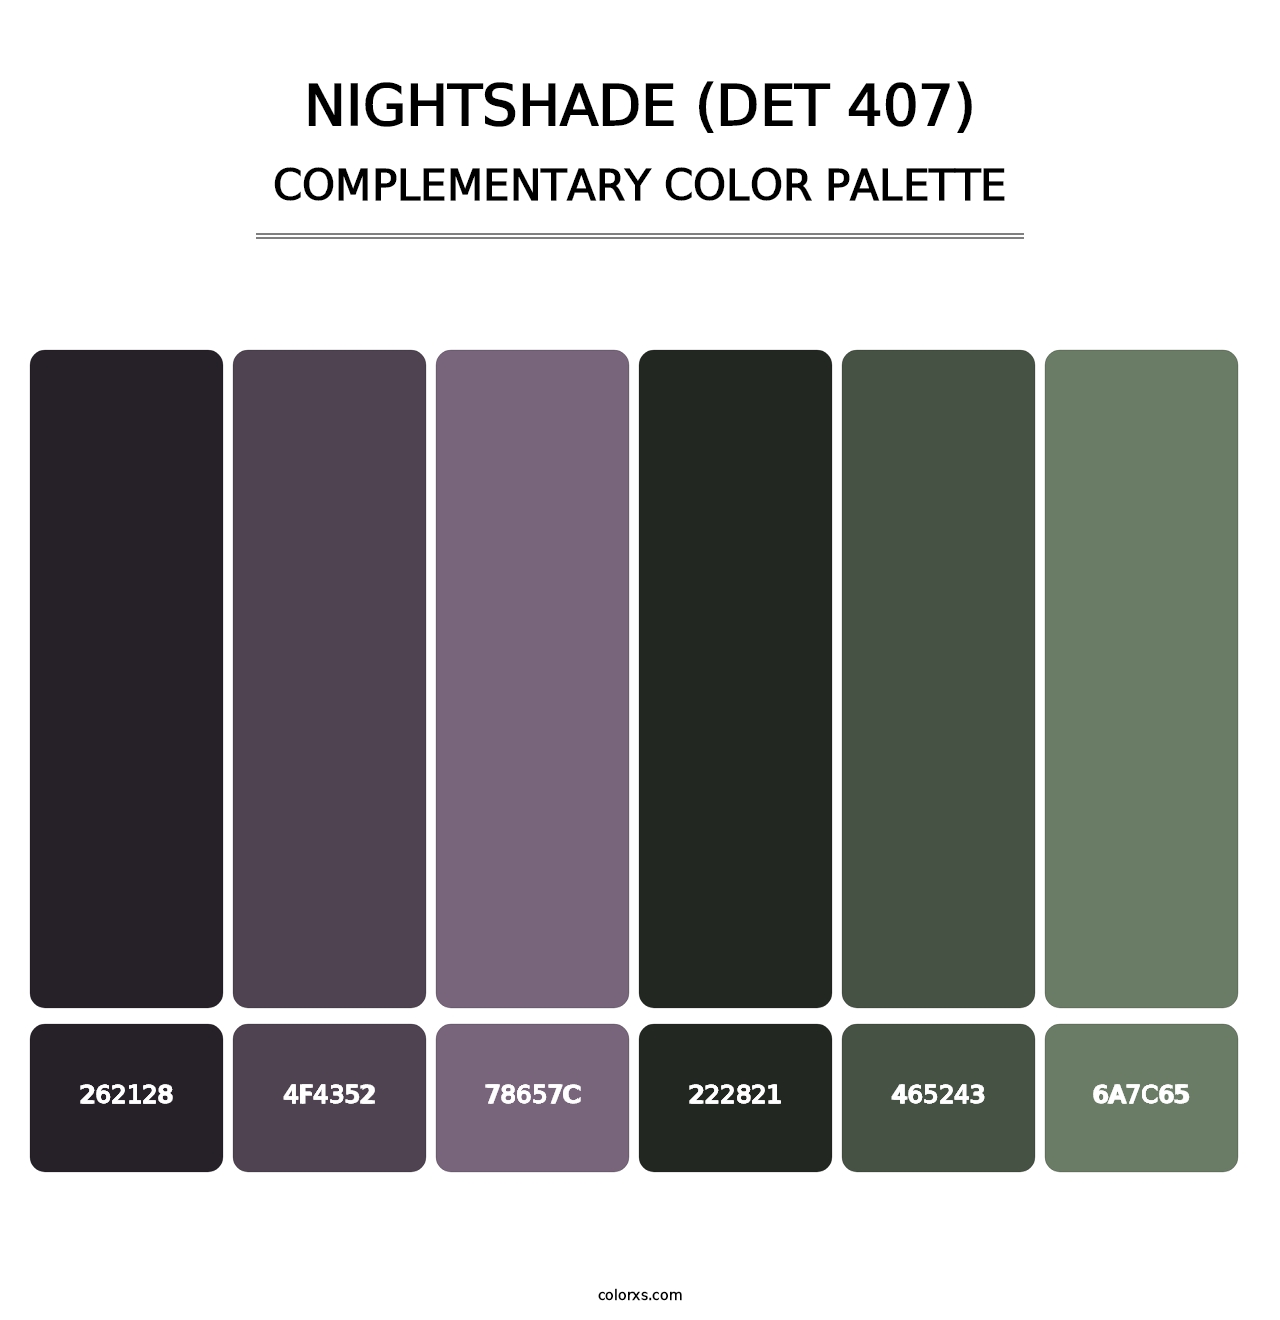 Nightshade (DET 407) - Complementary Color Palette